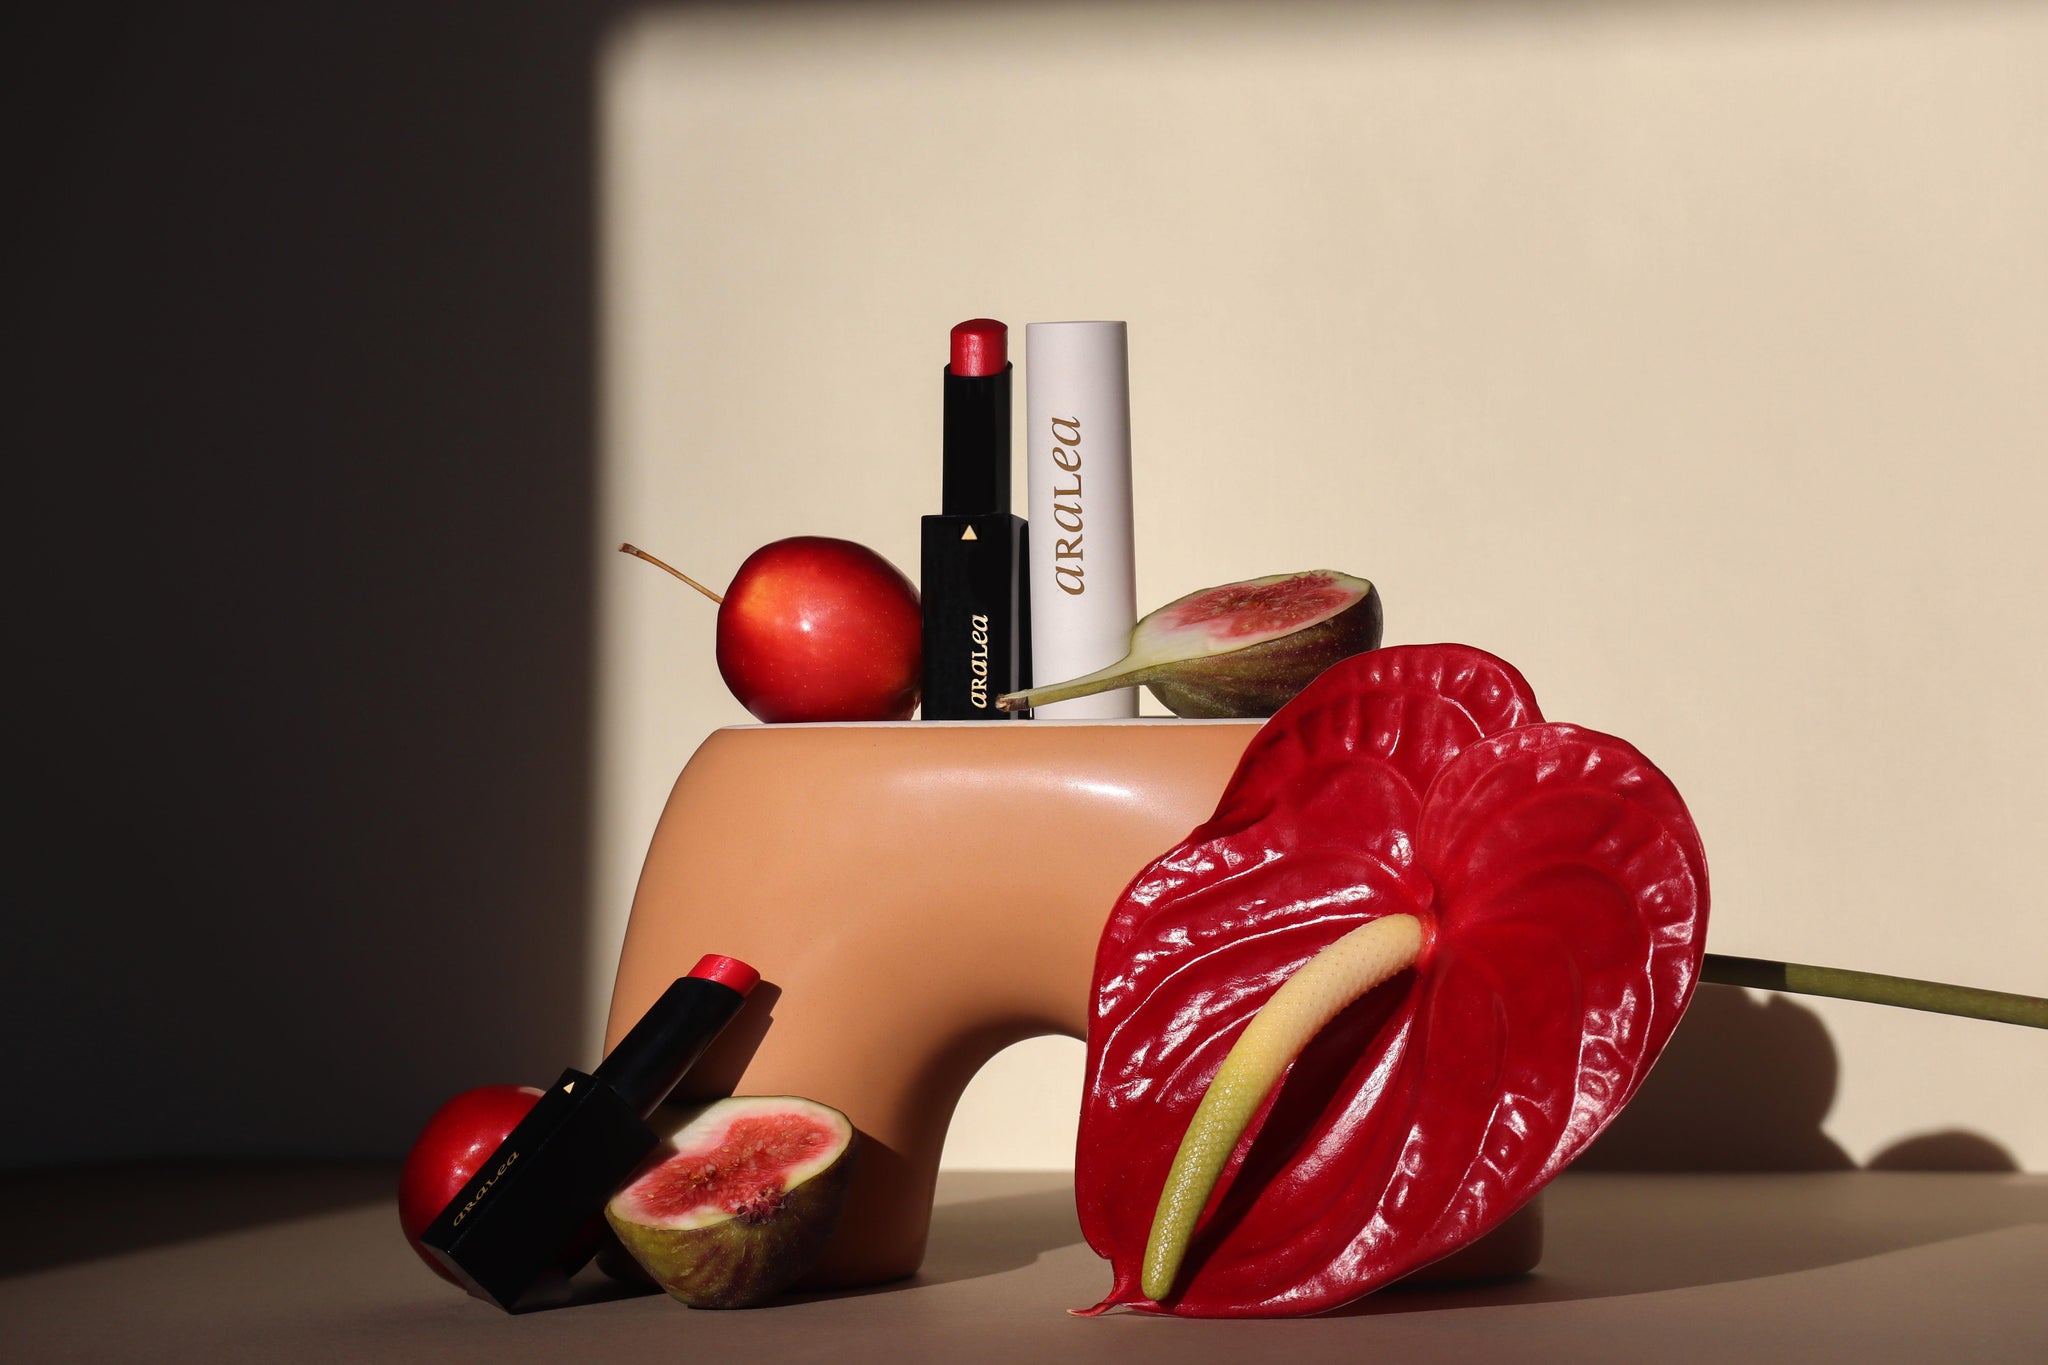 SUN KISS TINTS vitamin D infused lip care are positioned around a terra-cotta coloured ceramic vase nestled against a red anthurium bloom, fresh figs, and a crab apple. In direct sunlight against a beige poster board background.